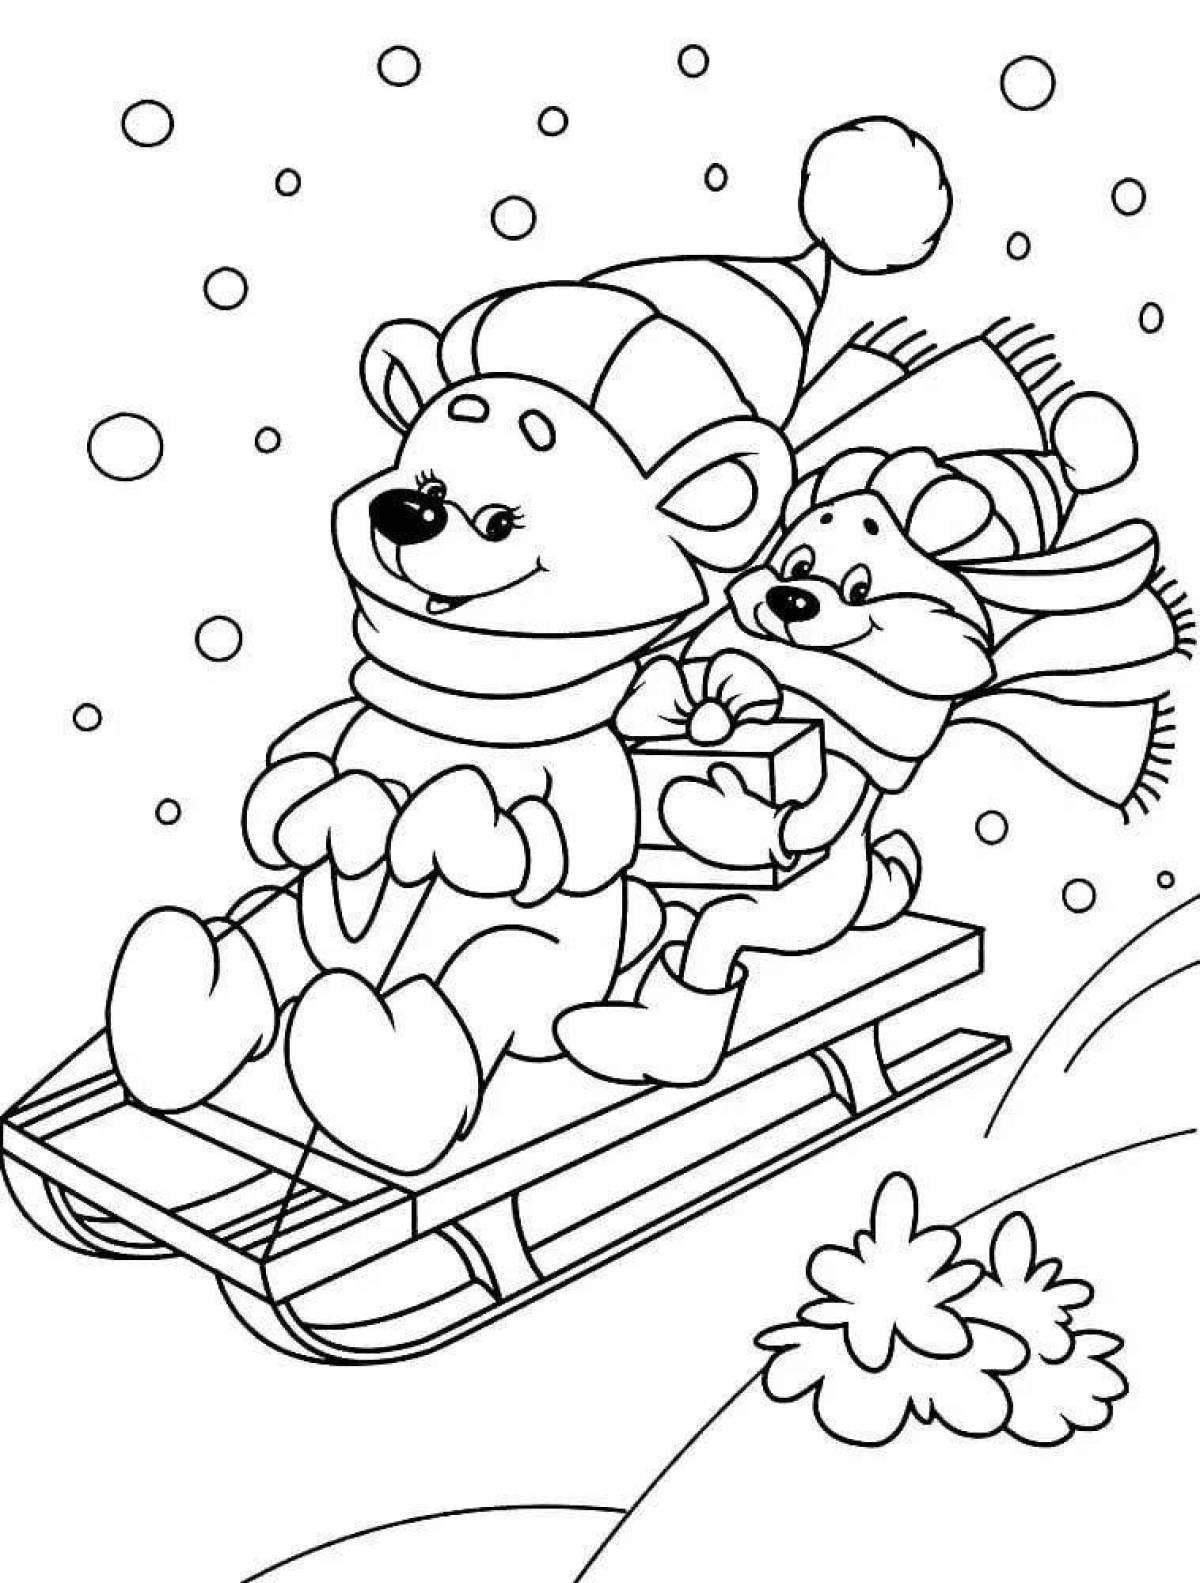 Colourful coloring for children 3-4 years old winter new year